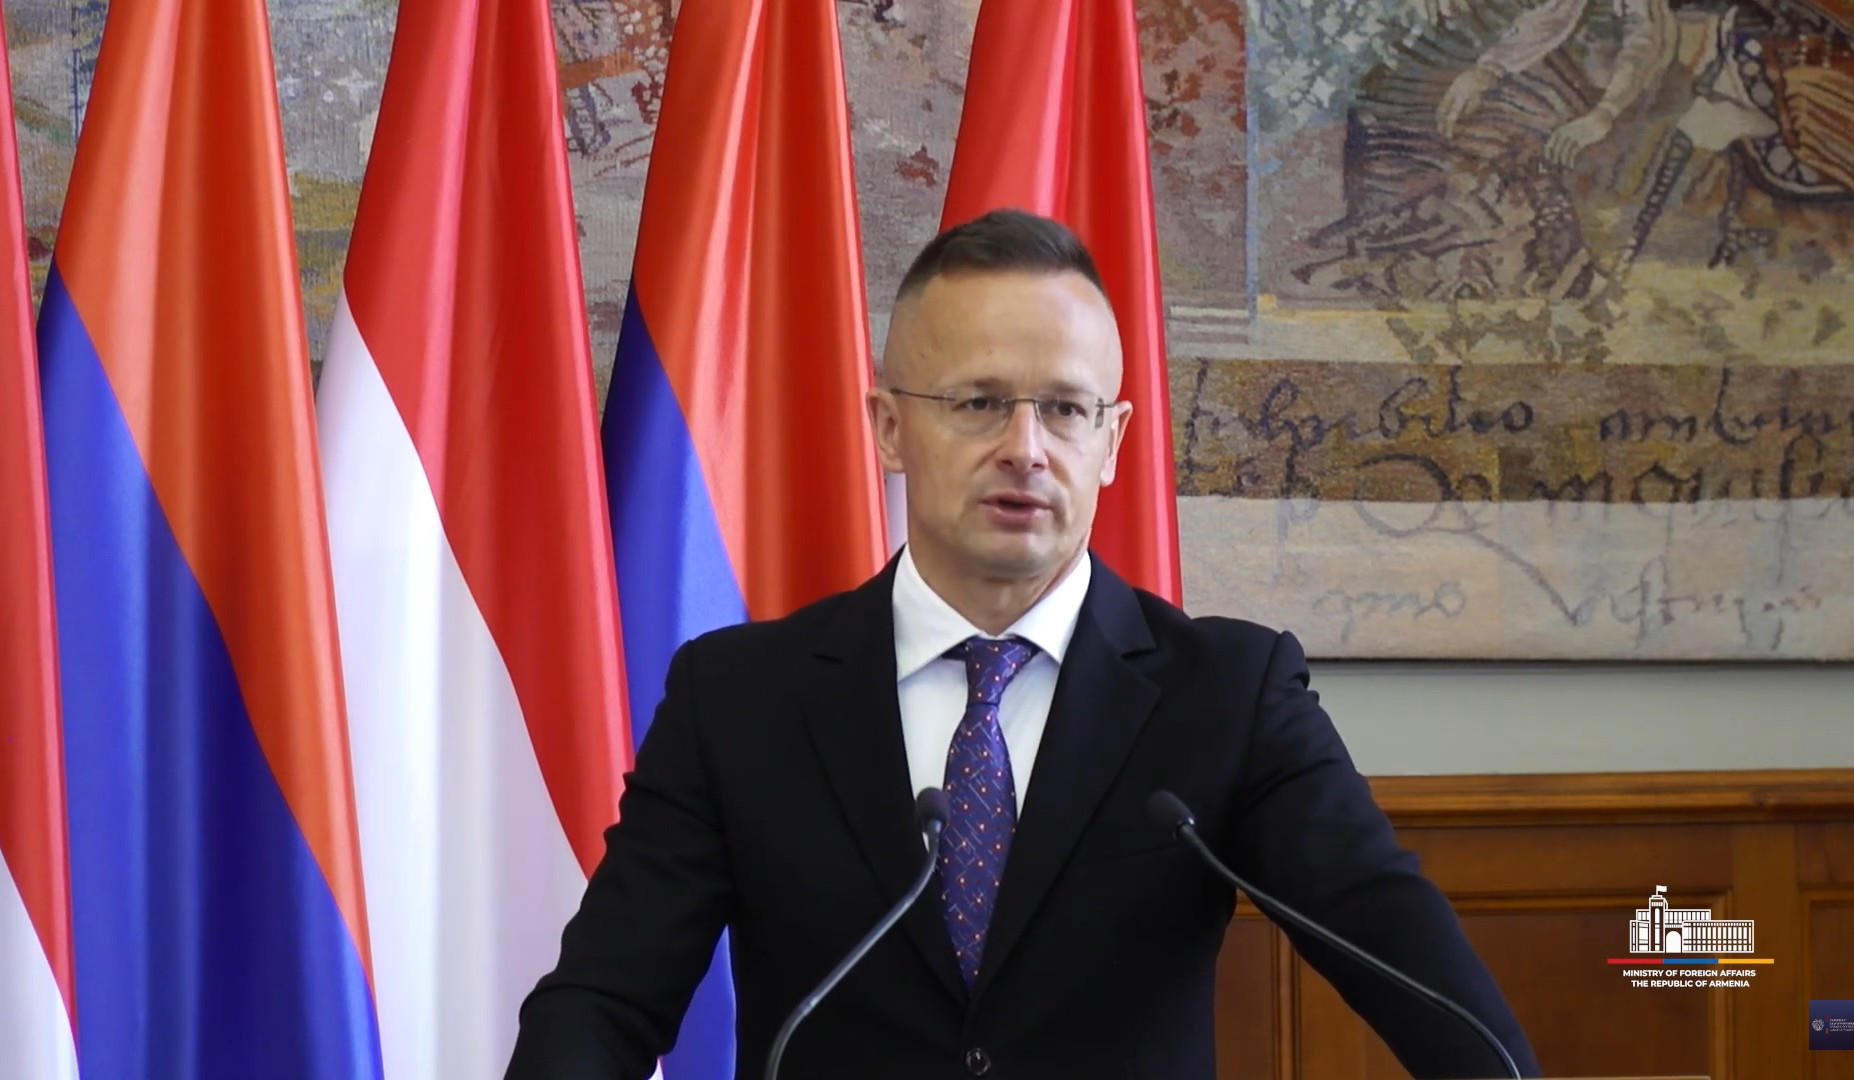 We welcome significant steps taken by both Armenia and Azerbaijan towards peace: Minister of Foreign Affairs of Hungary